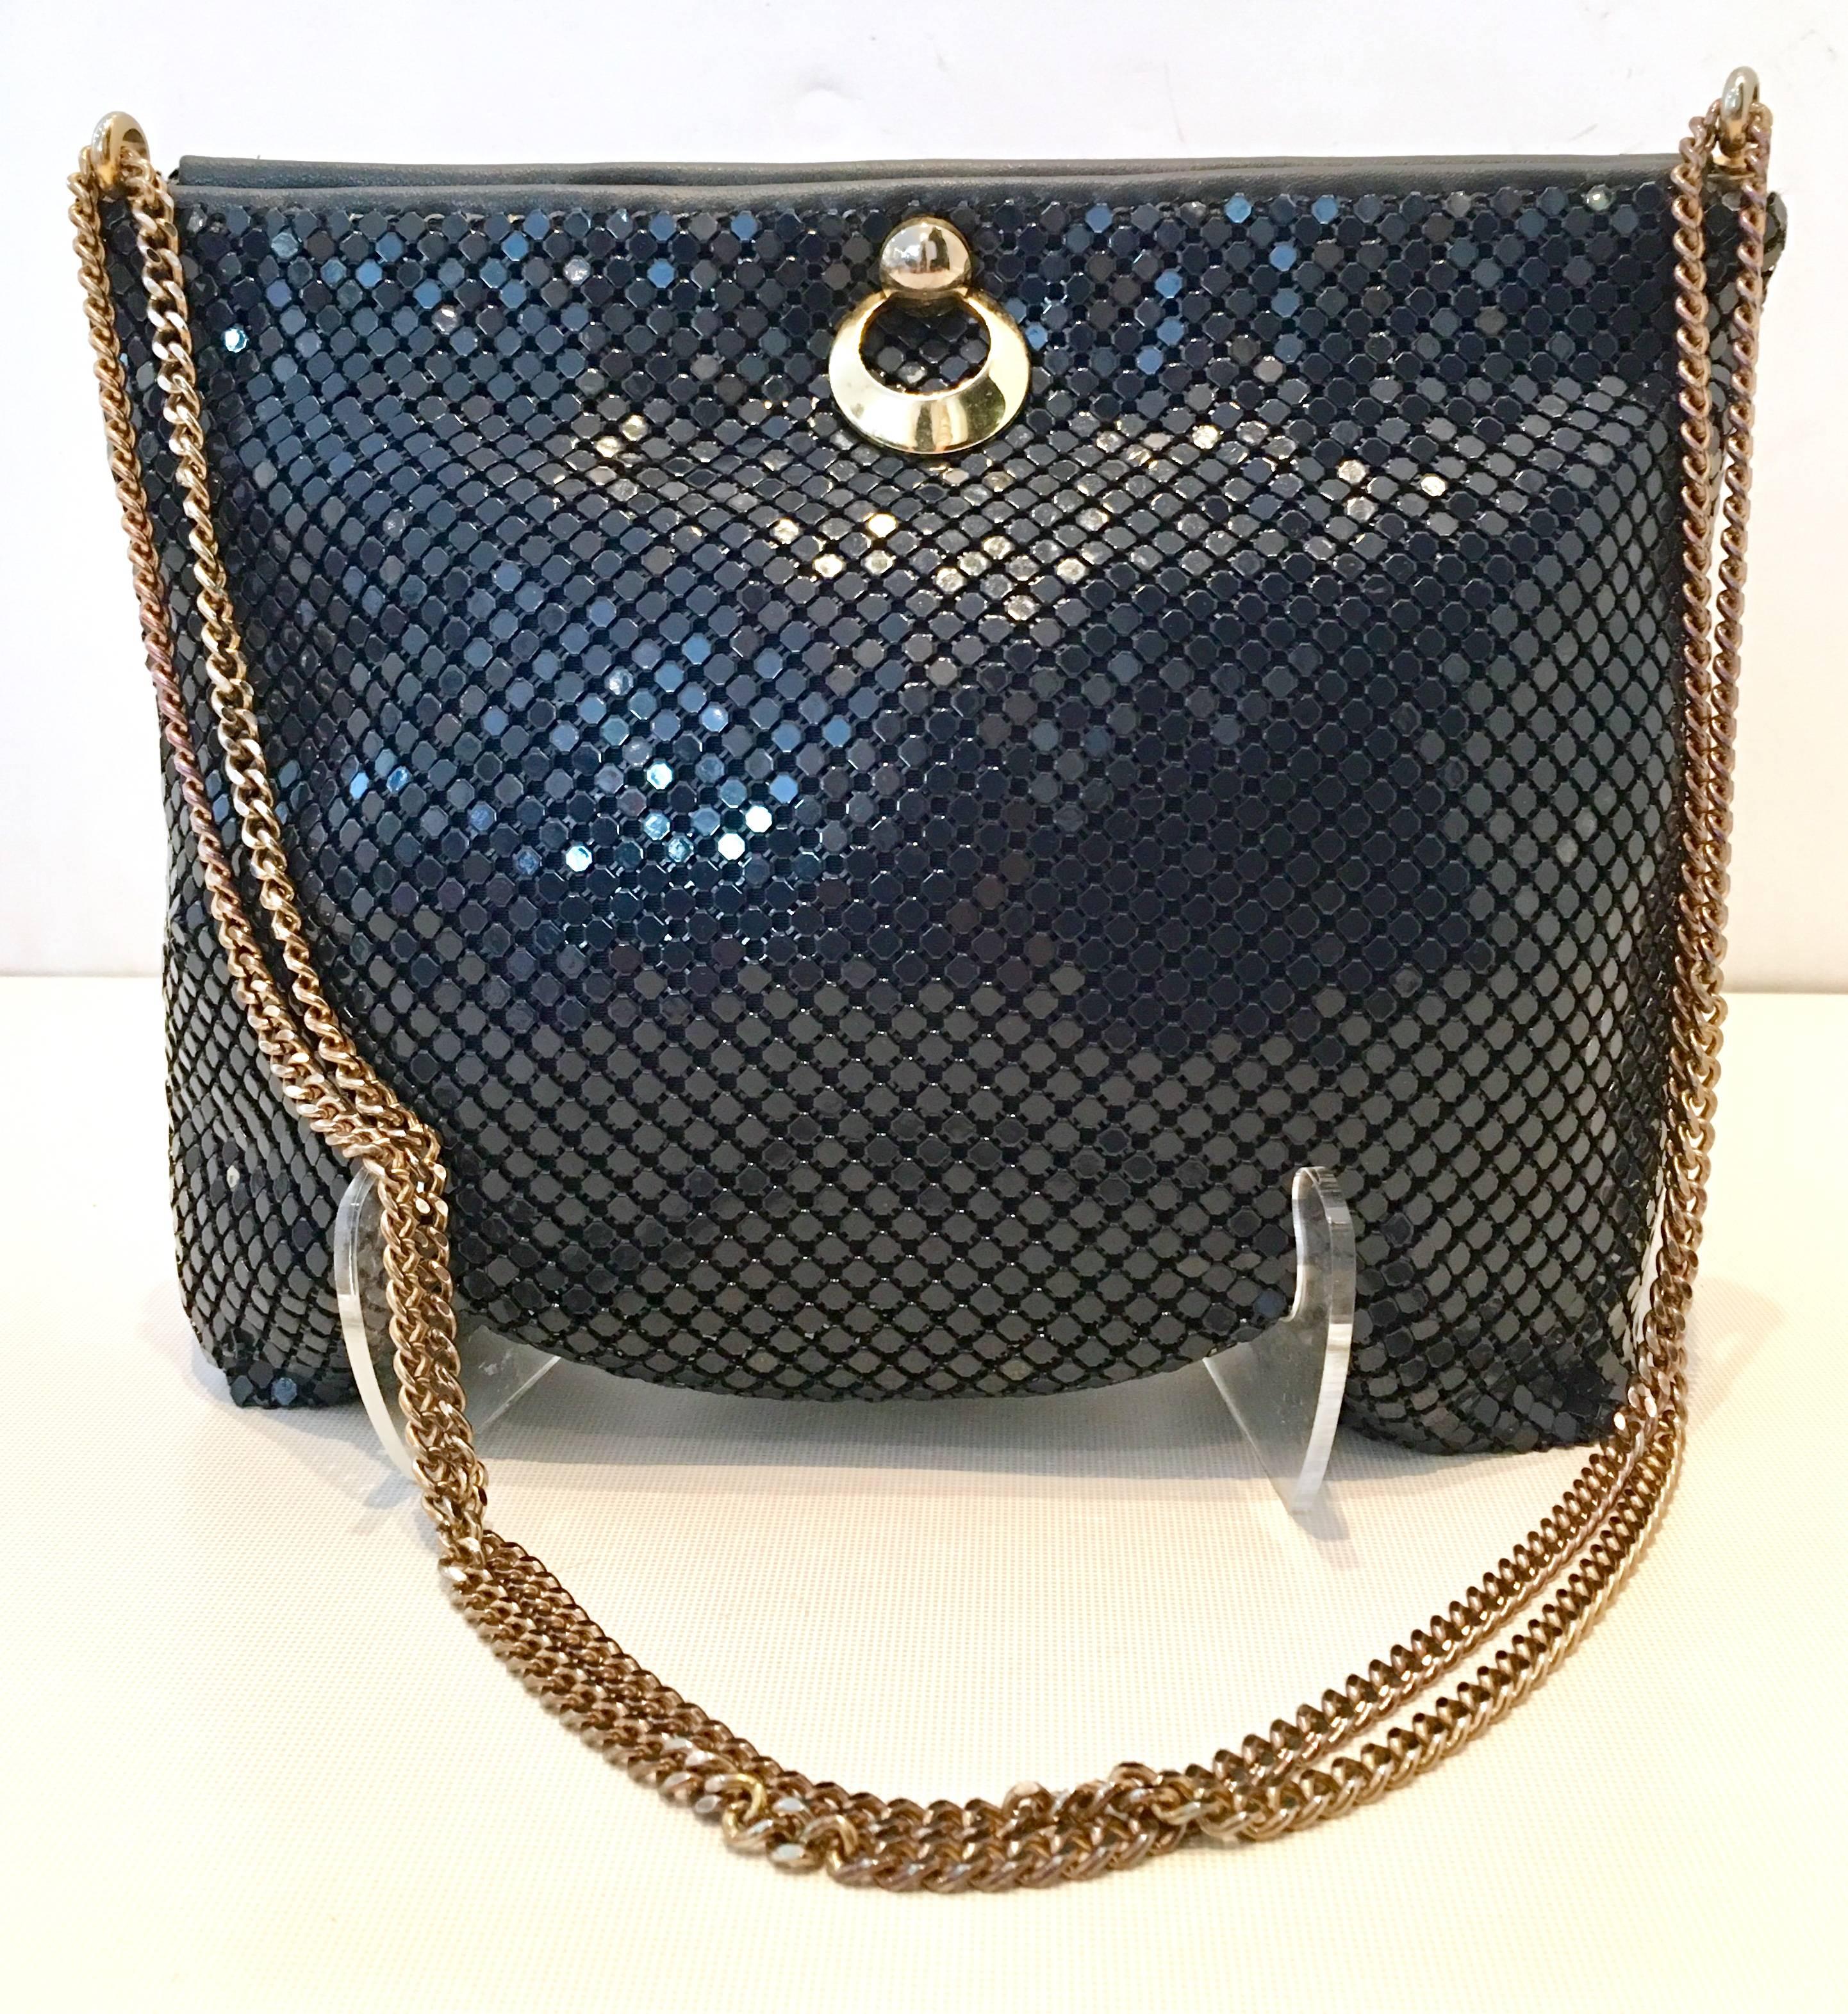 Vintage Whiting & Davis Navy & Gold Metal Mesh Shoulder Hand Bag. This rare navy hand bag features a god chain link adjustable double shoulder strap with accordion style open and close feature and gold tone snap closure hardware. The interior is